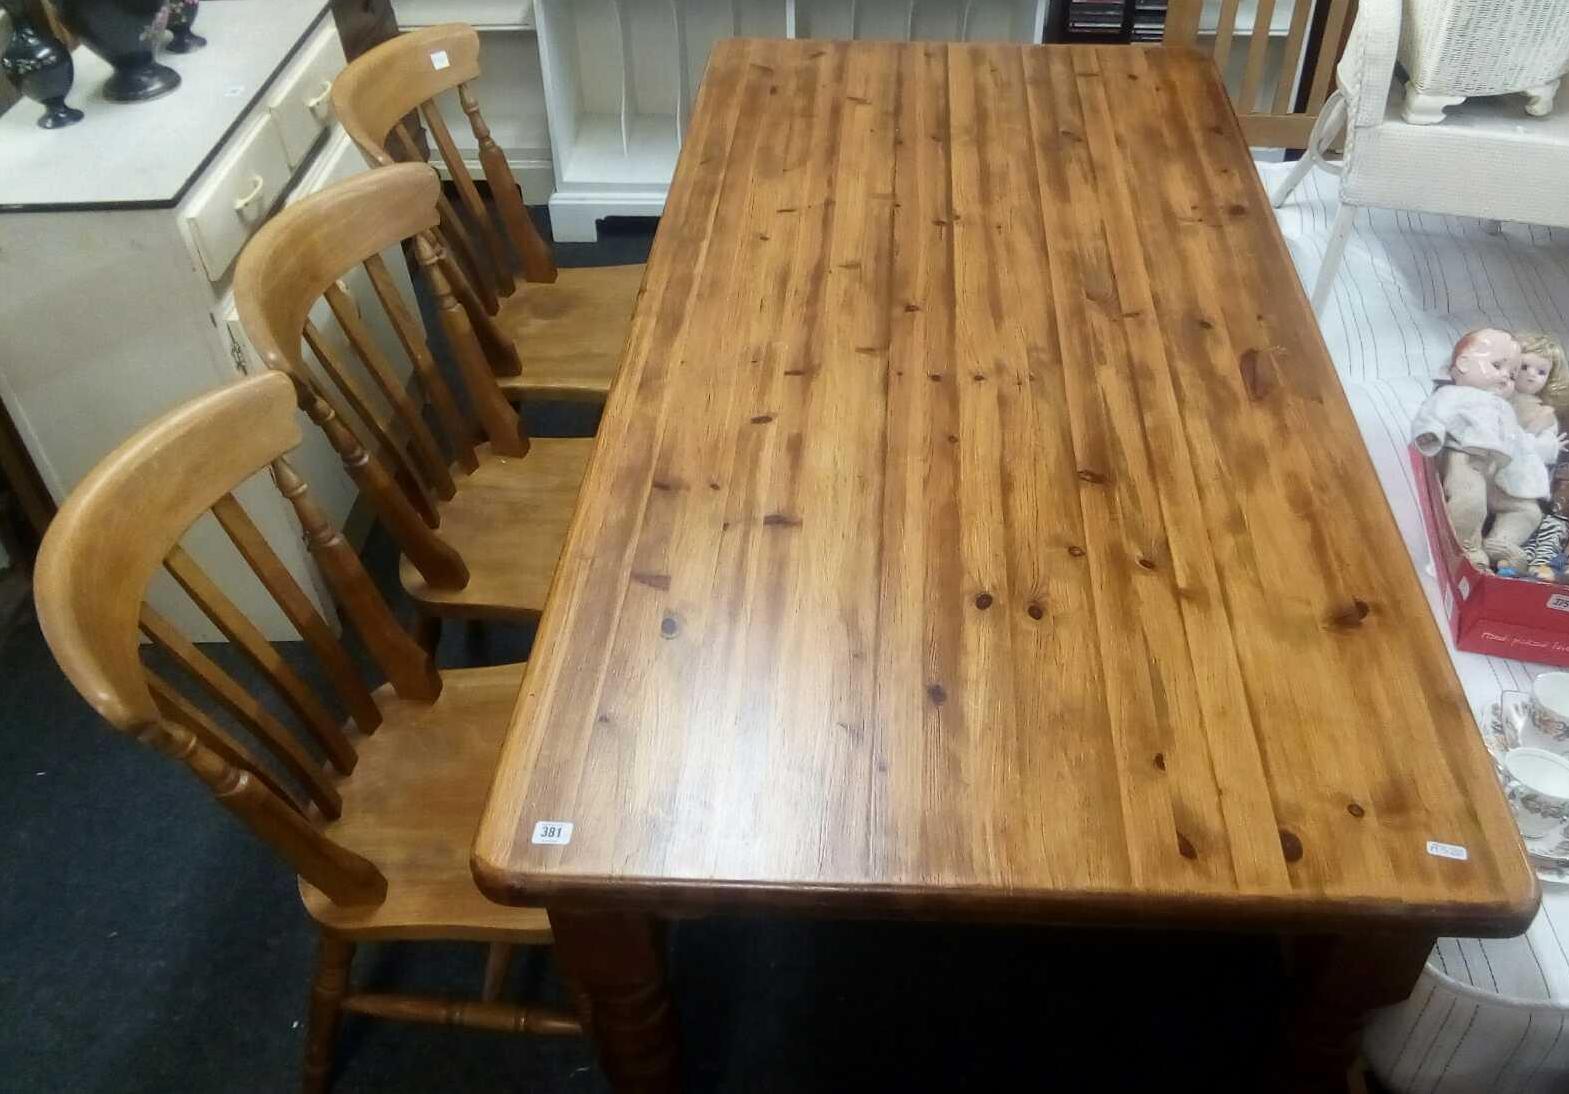 LARGE PINE FARM HOUSE TABLE 6FT X 3FT WITH THREE BEECH WOOD CHAIRS